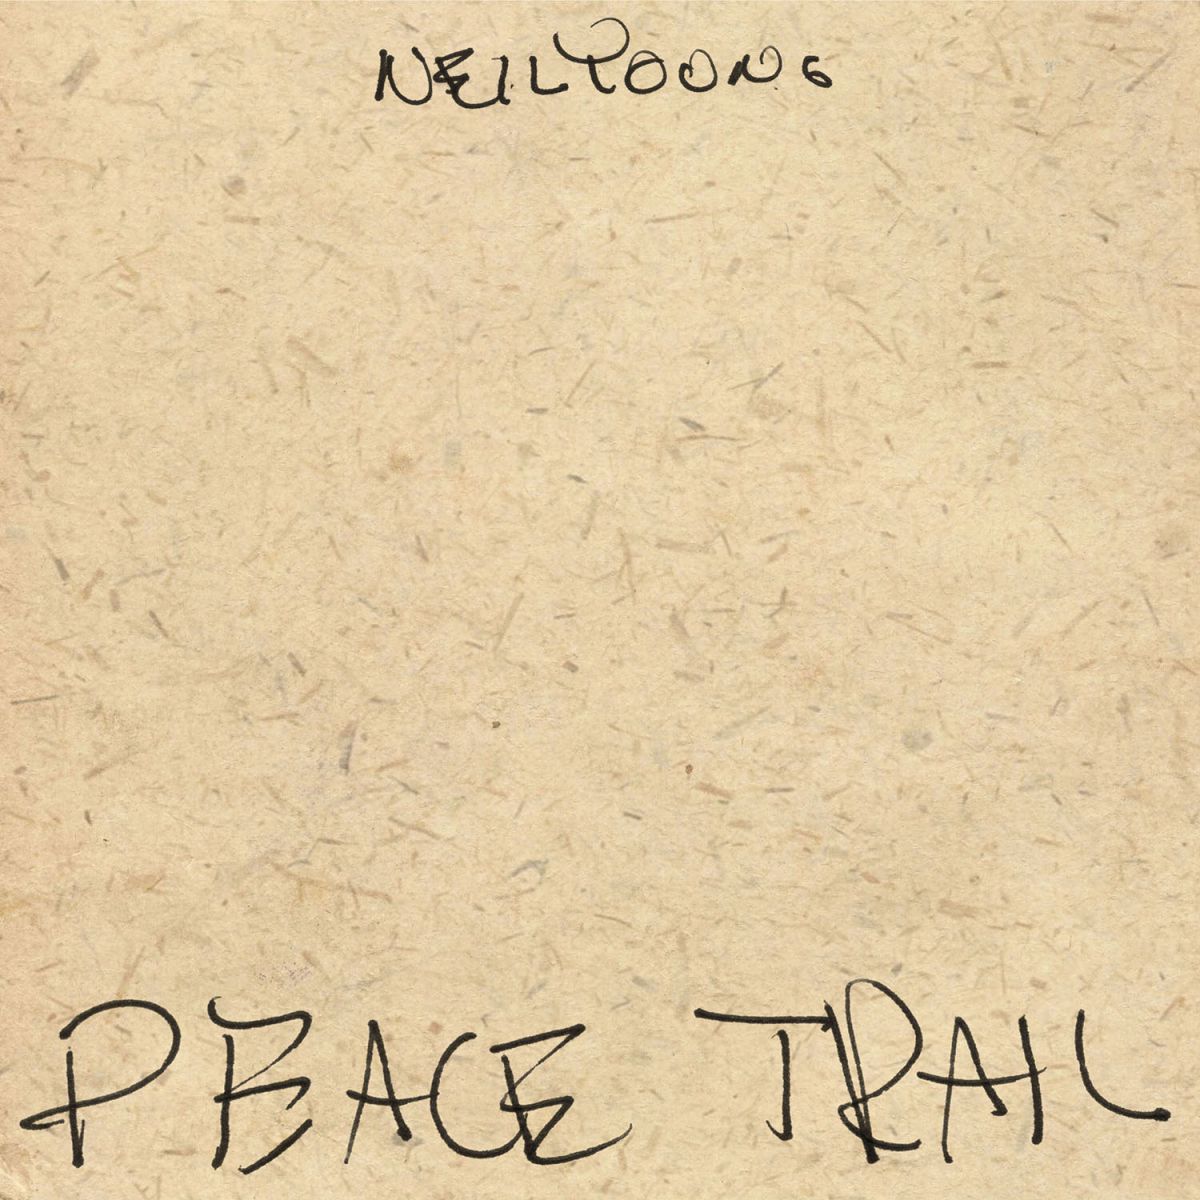 neil-young-peace-trail